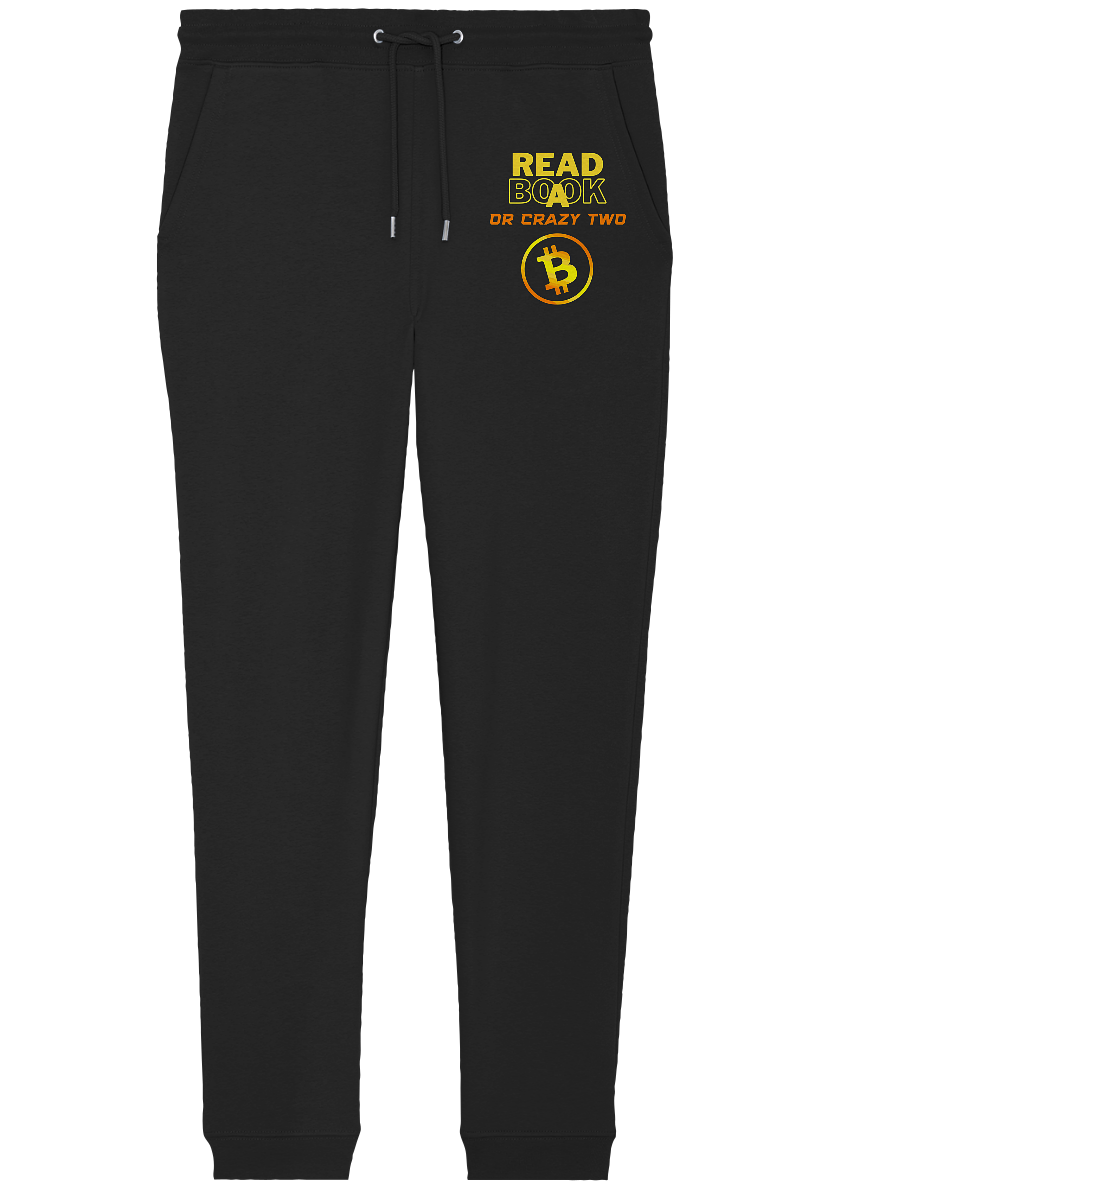 READ A BOOK OR CRAZY TWO - Ladies Collection - Organic Jogger Pants